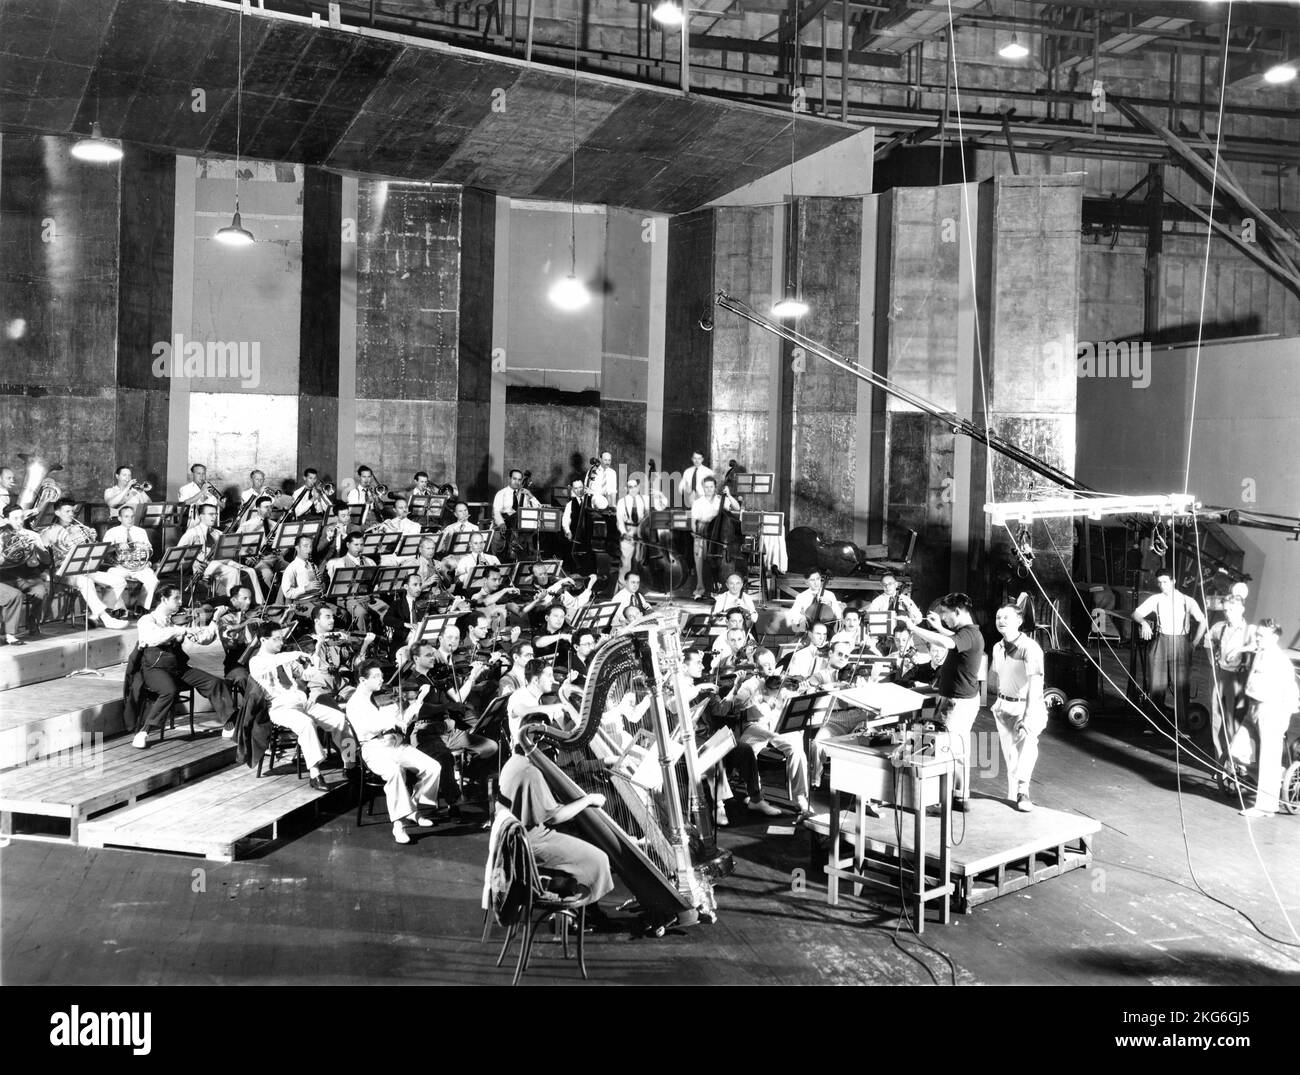 Musical Director ALFRED NEWMAN conducting Orchestra during recording at United Artists Studios of songs sung by Metropolitan Opera Star LAWRENCE TIBBETT (standing to right of Newman) for METROPOLITAN 1935 director RICHARD BOLESLAWSKI producer Darryl F. Zanuck presenter Joseph M. Schenck 20th Century Pictures / Twentieth Century Fox Stock Photo